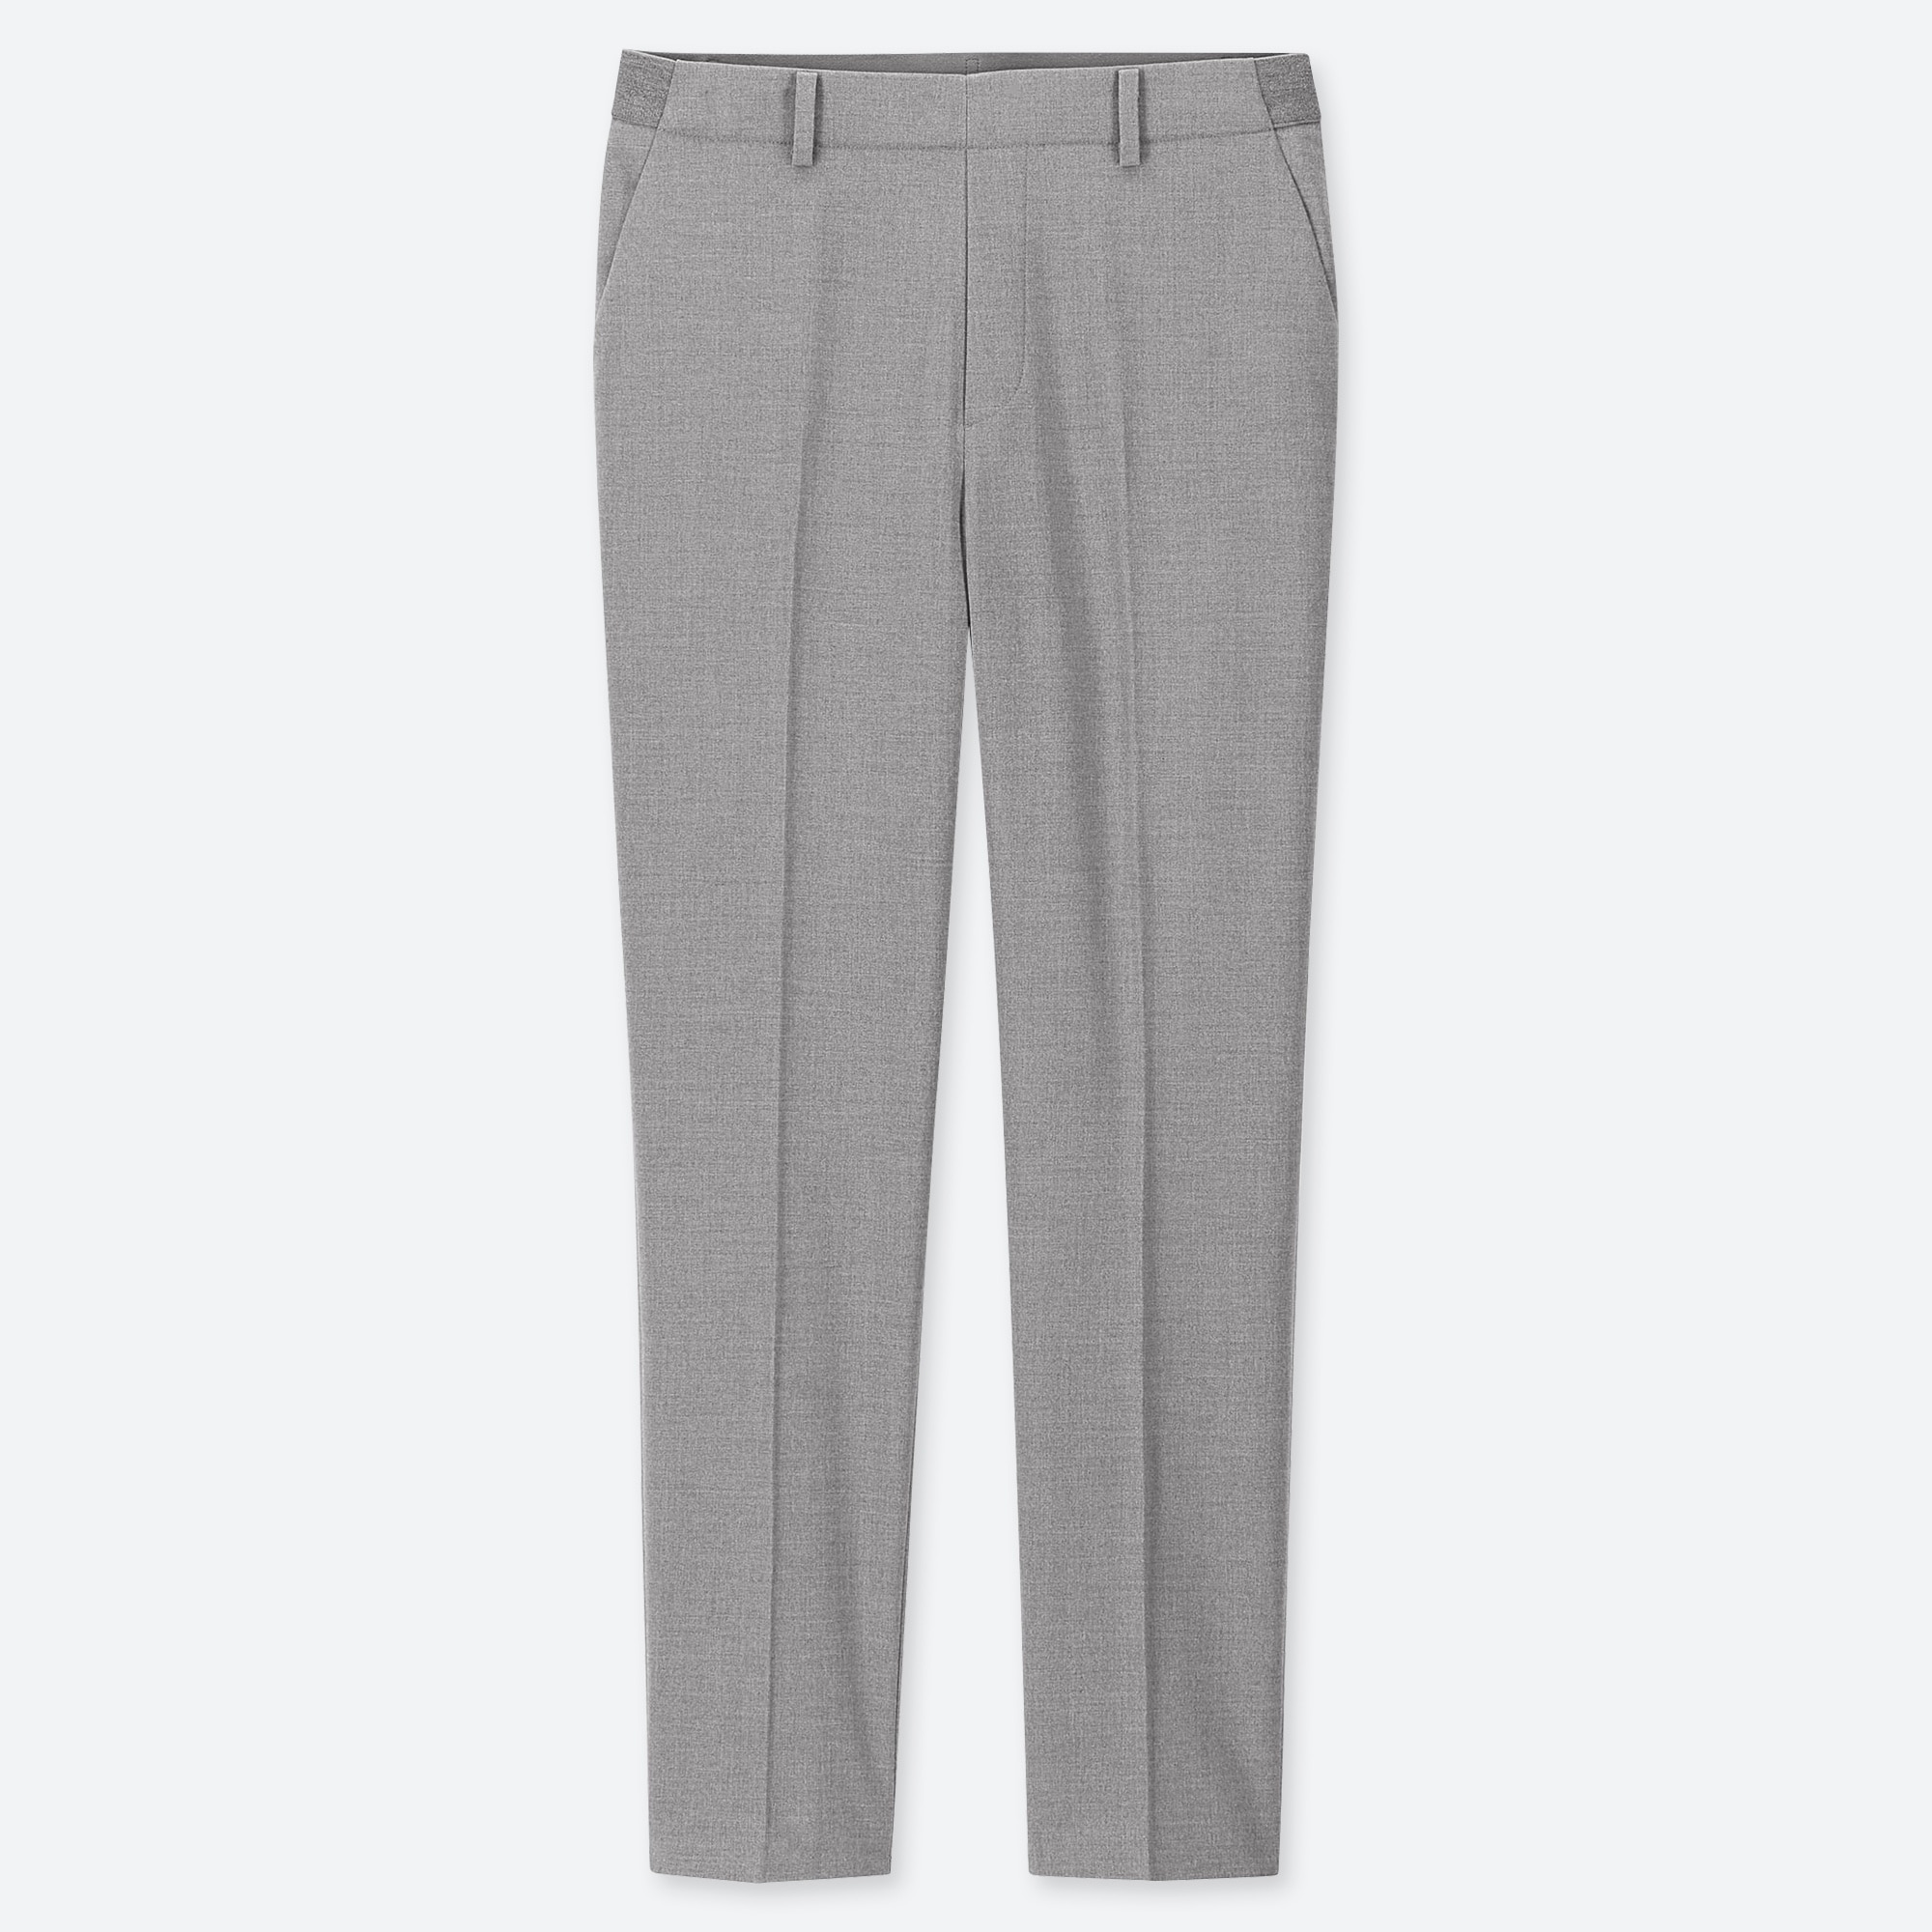 WOMEN EZY ANKLE-LENGTH PANTS (TALL) (ONLINE EXCLUSIVE)